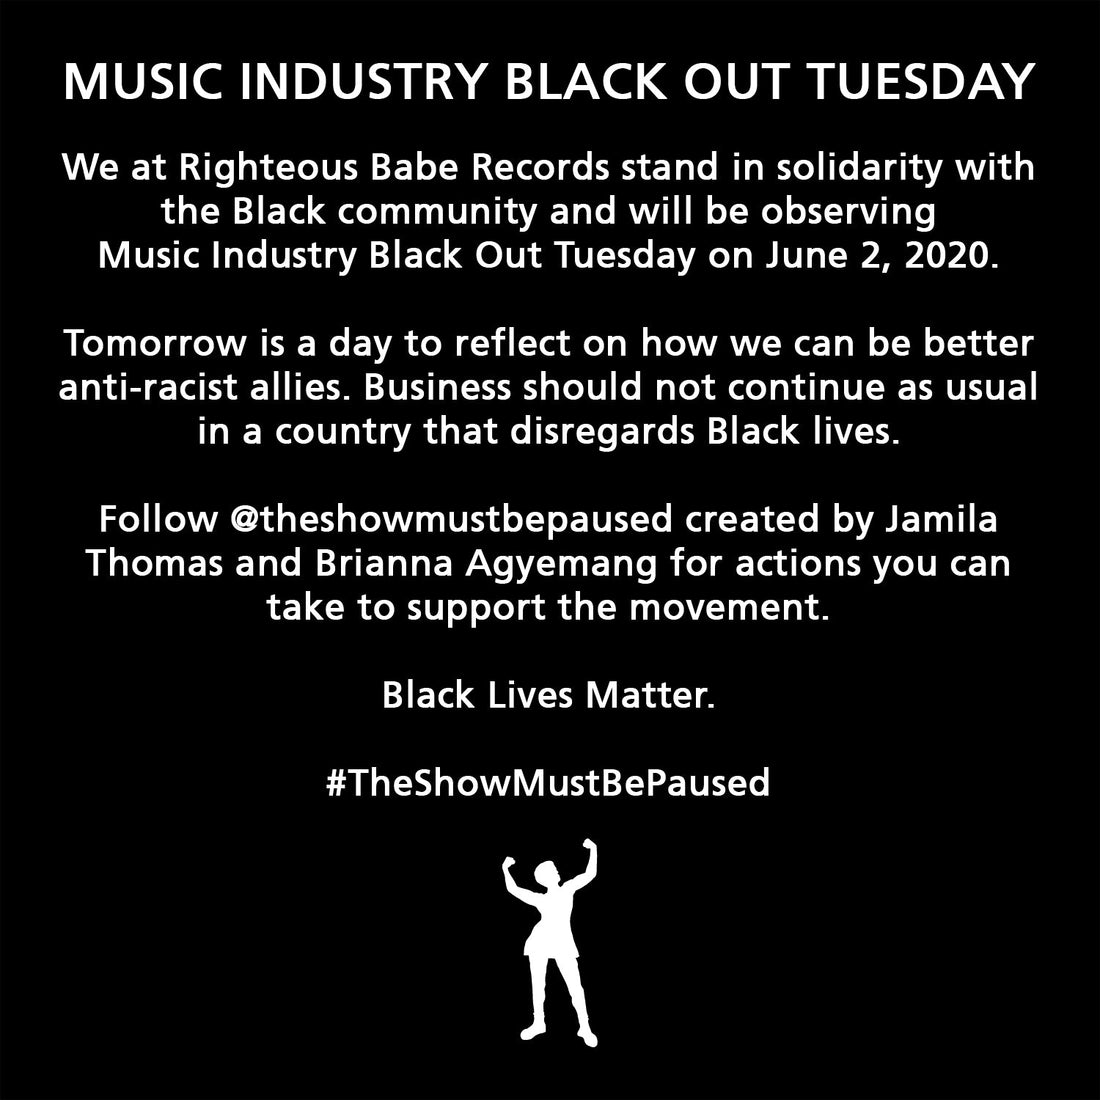 Music Industry Black Out Tuesday